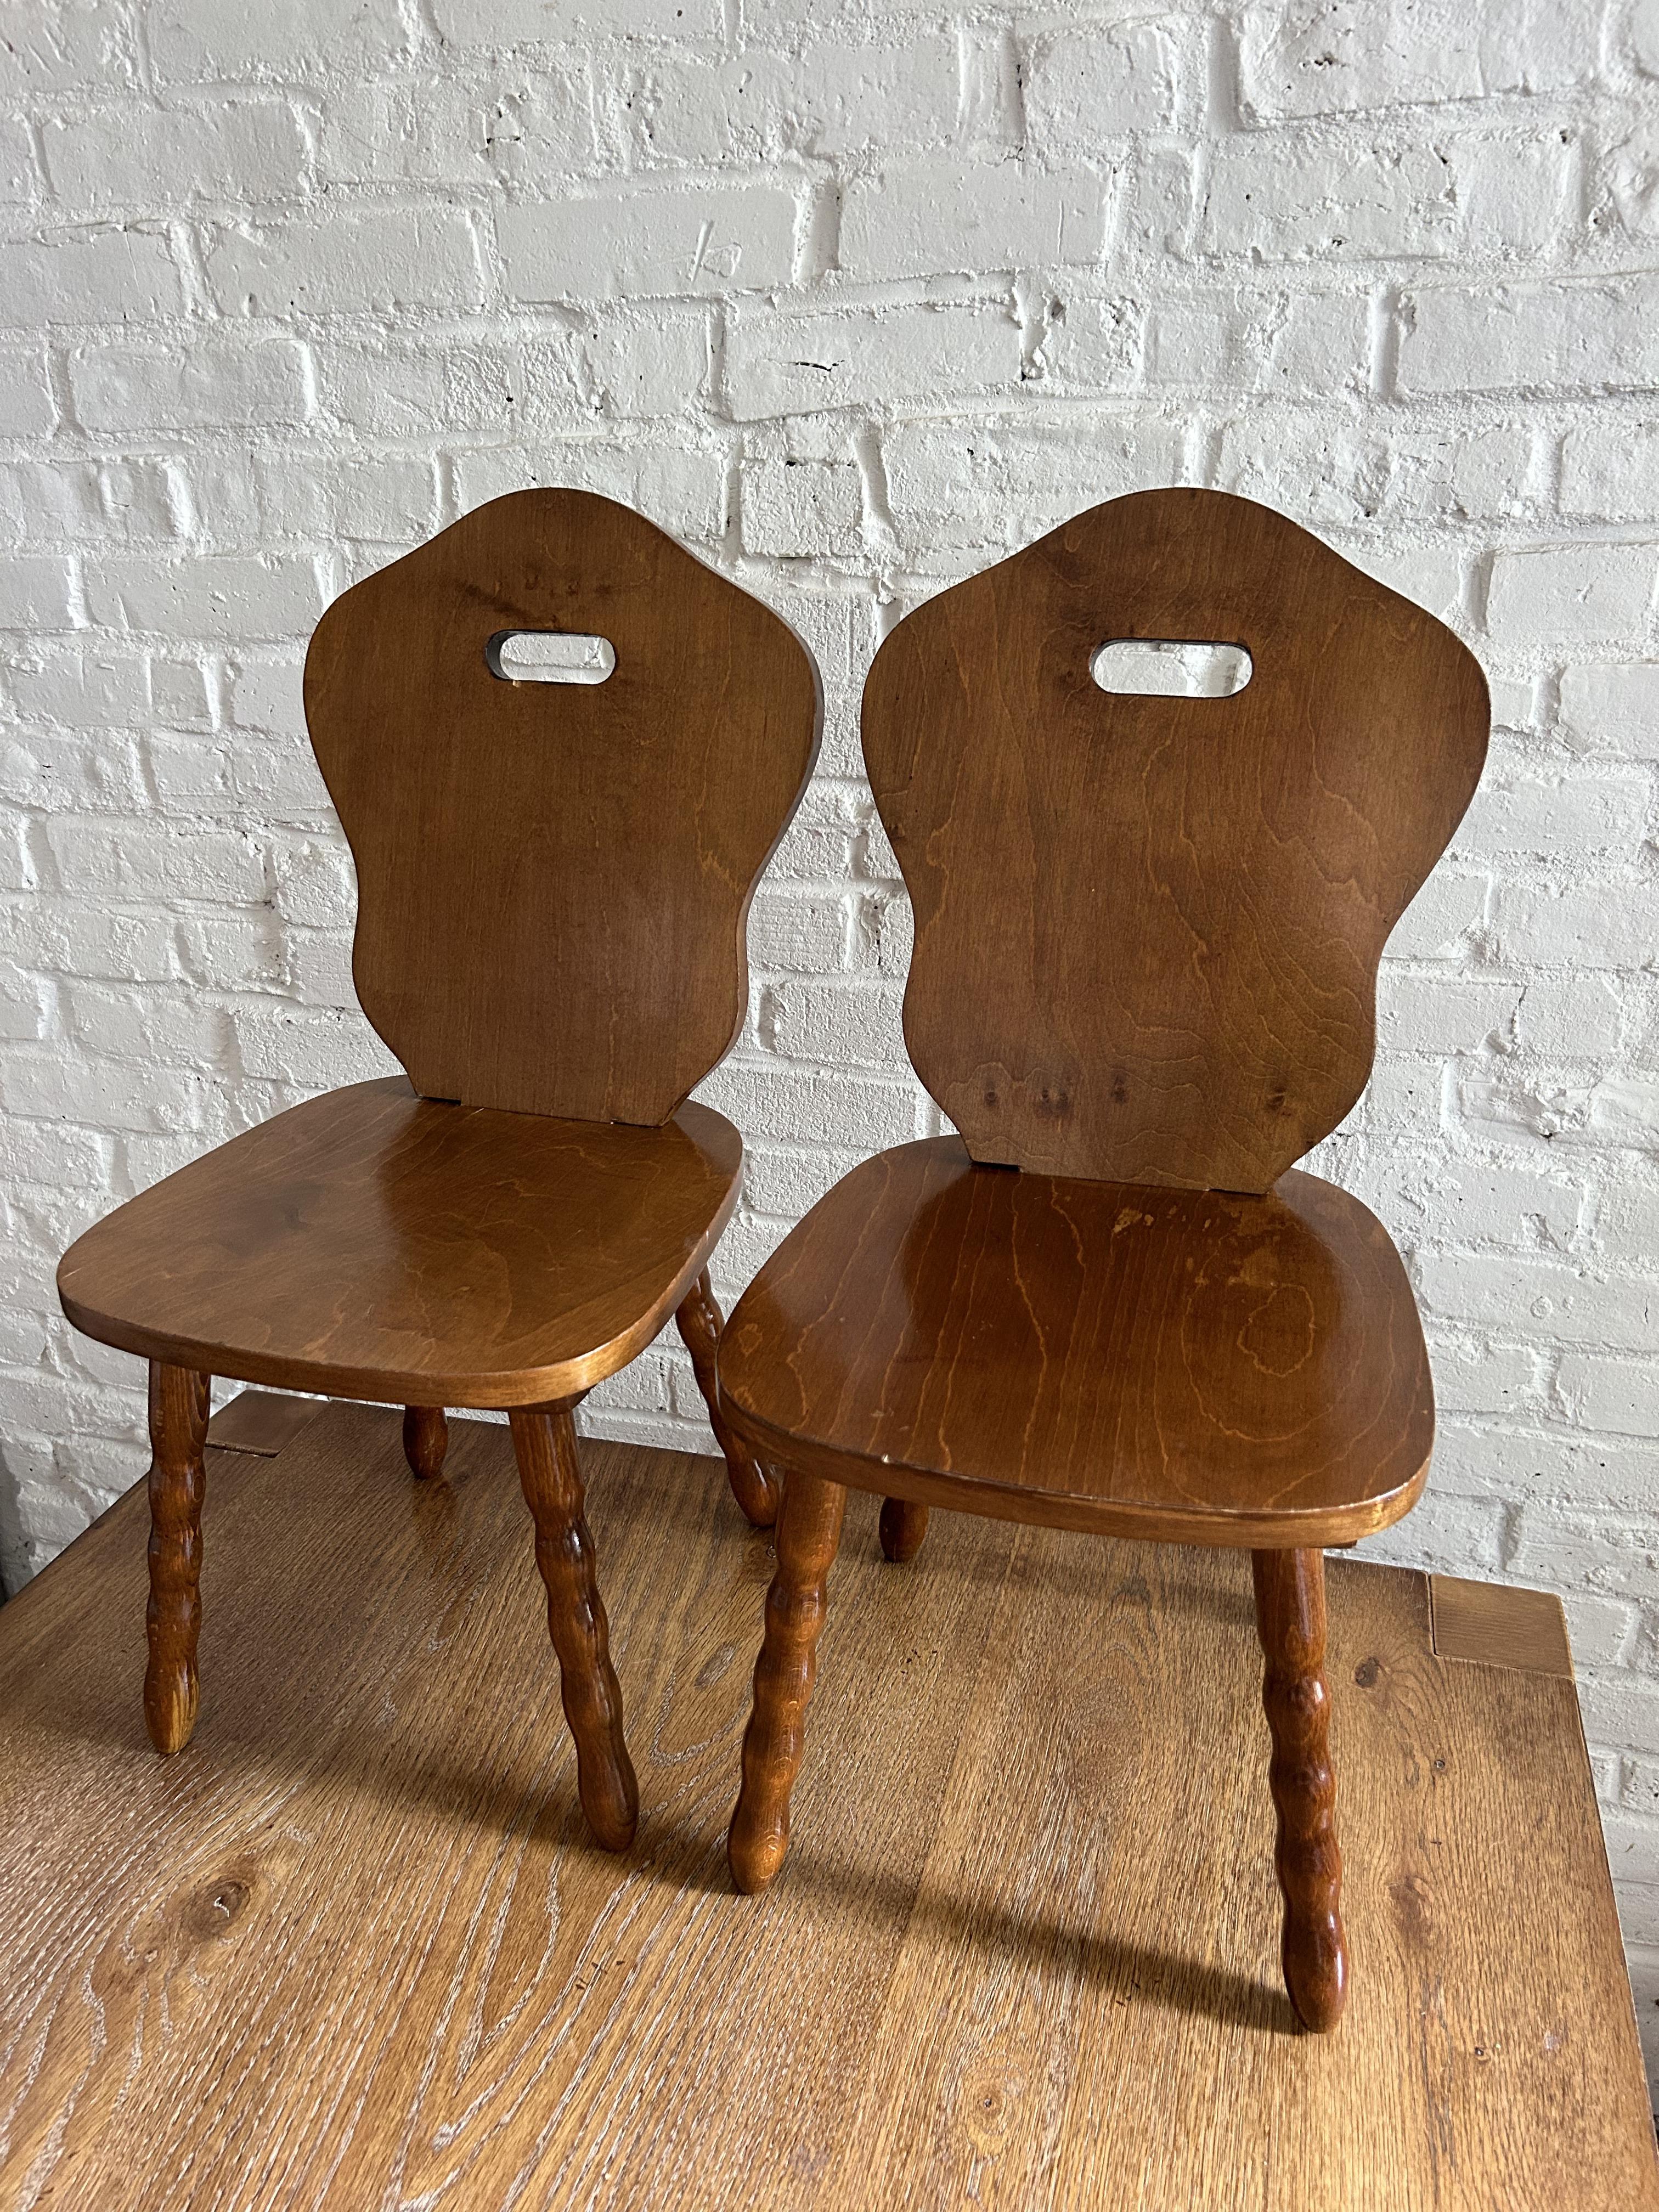 Romanian Set of 3 1960s Solid Wood Decorative Stools / Children's Chair, Made in Romania